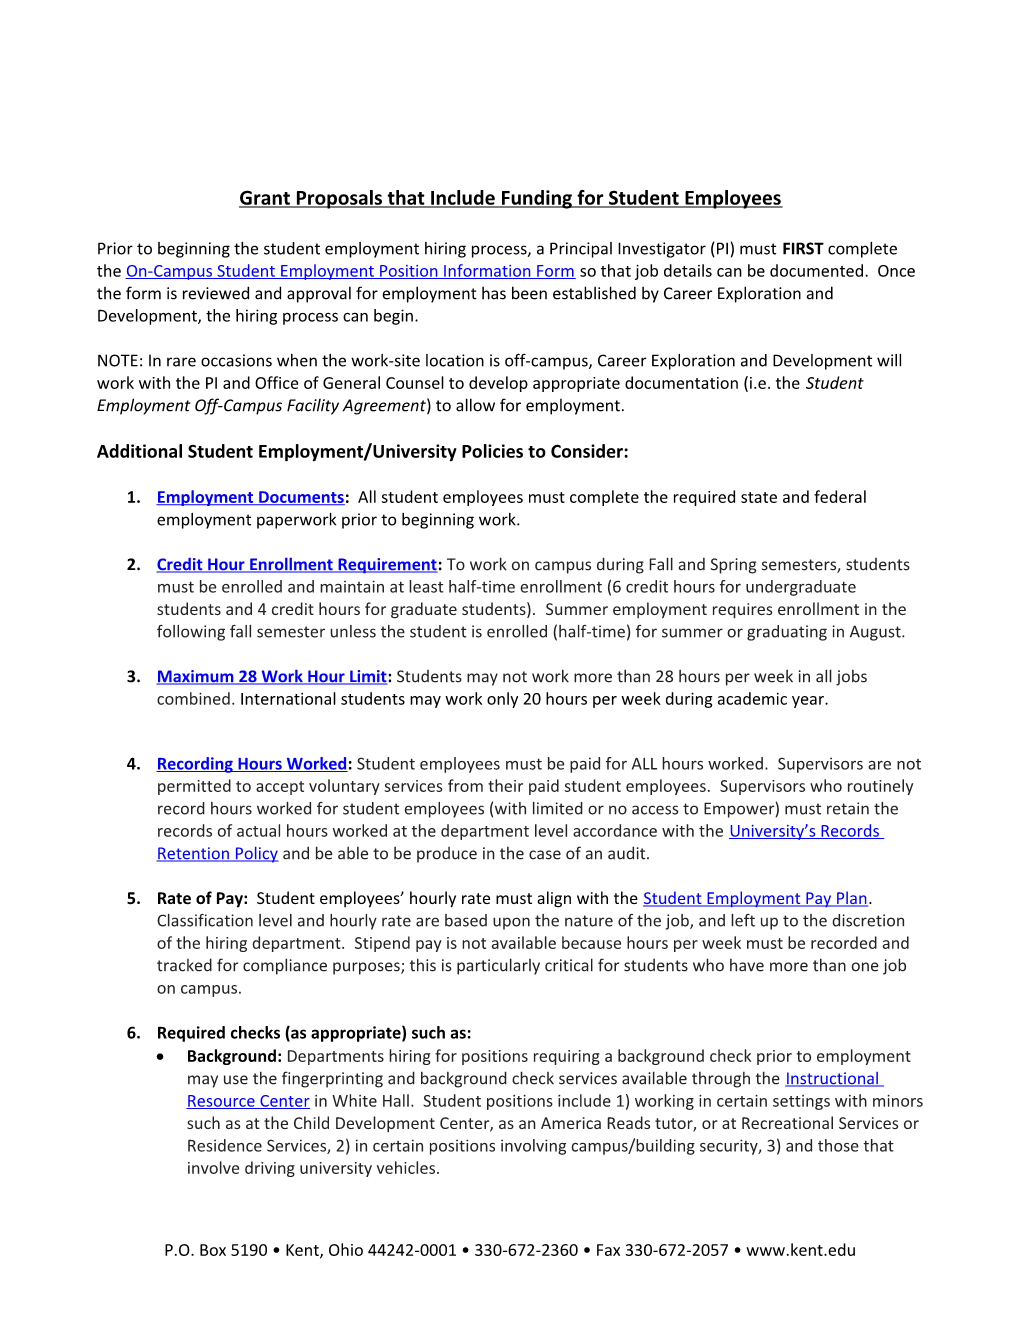 Grant Proposals That Include Funding for Student Employees